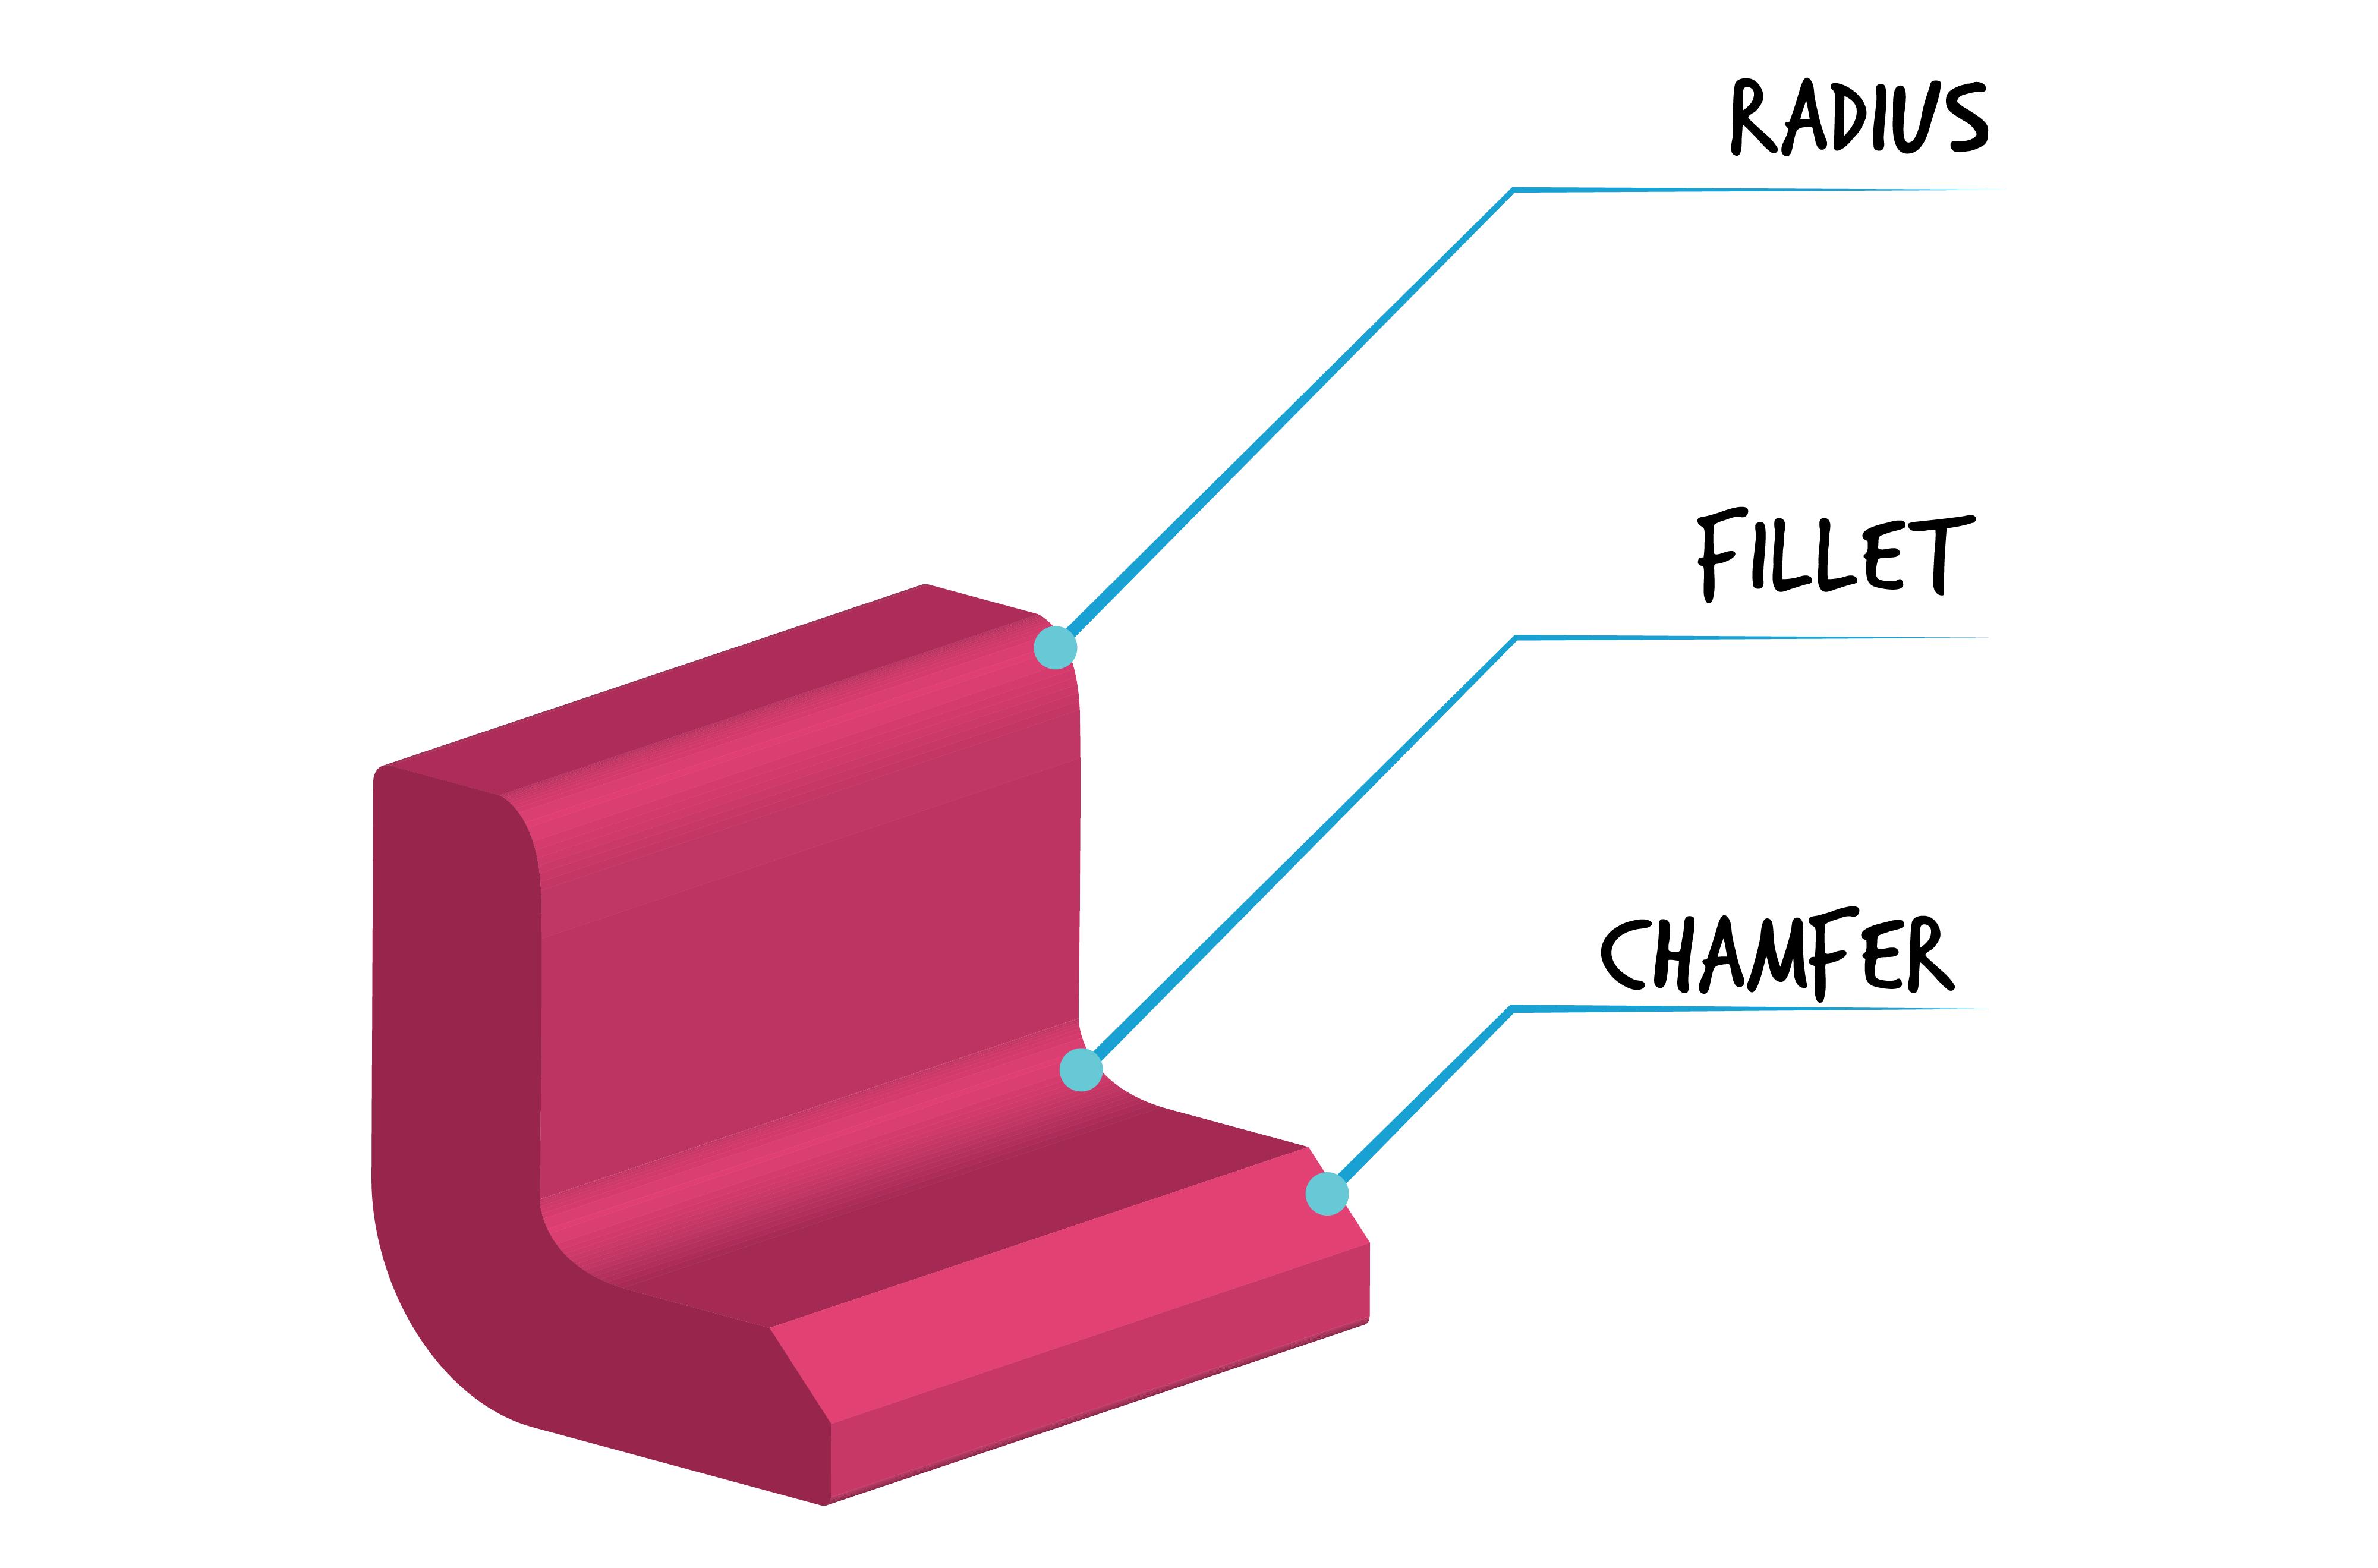 This pink form shows a vertical surface joining a horizontal surface in 3 different ways in different areas on the shape: firstly, using a radius to make a smooth external transition; secondly, using a fillet to make a smooth internal transition; thirdly, using a chamfer to make an angular transition.